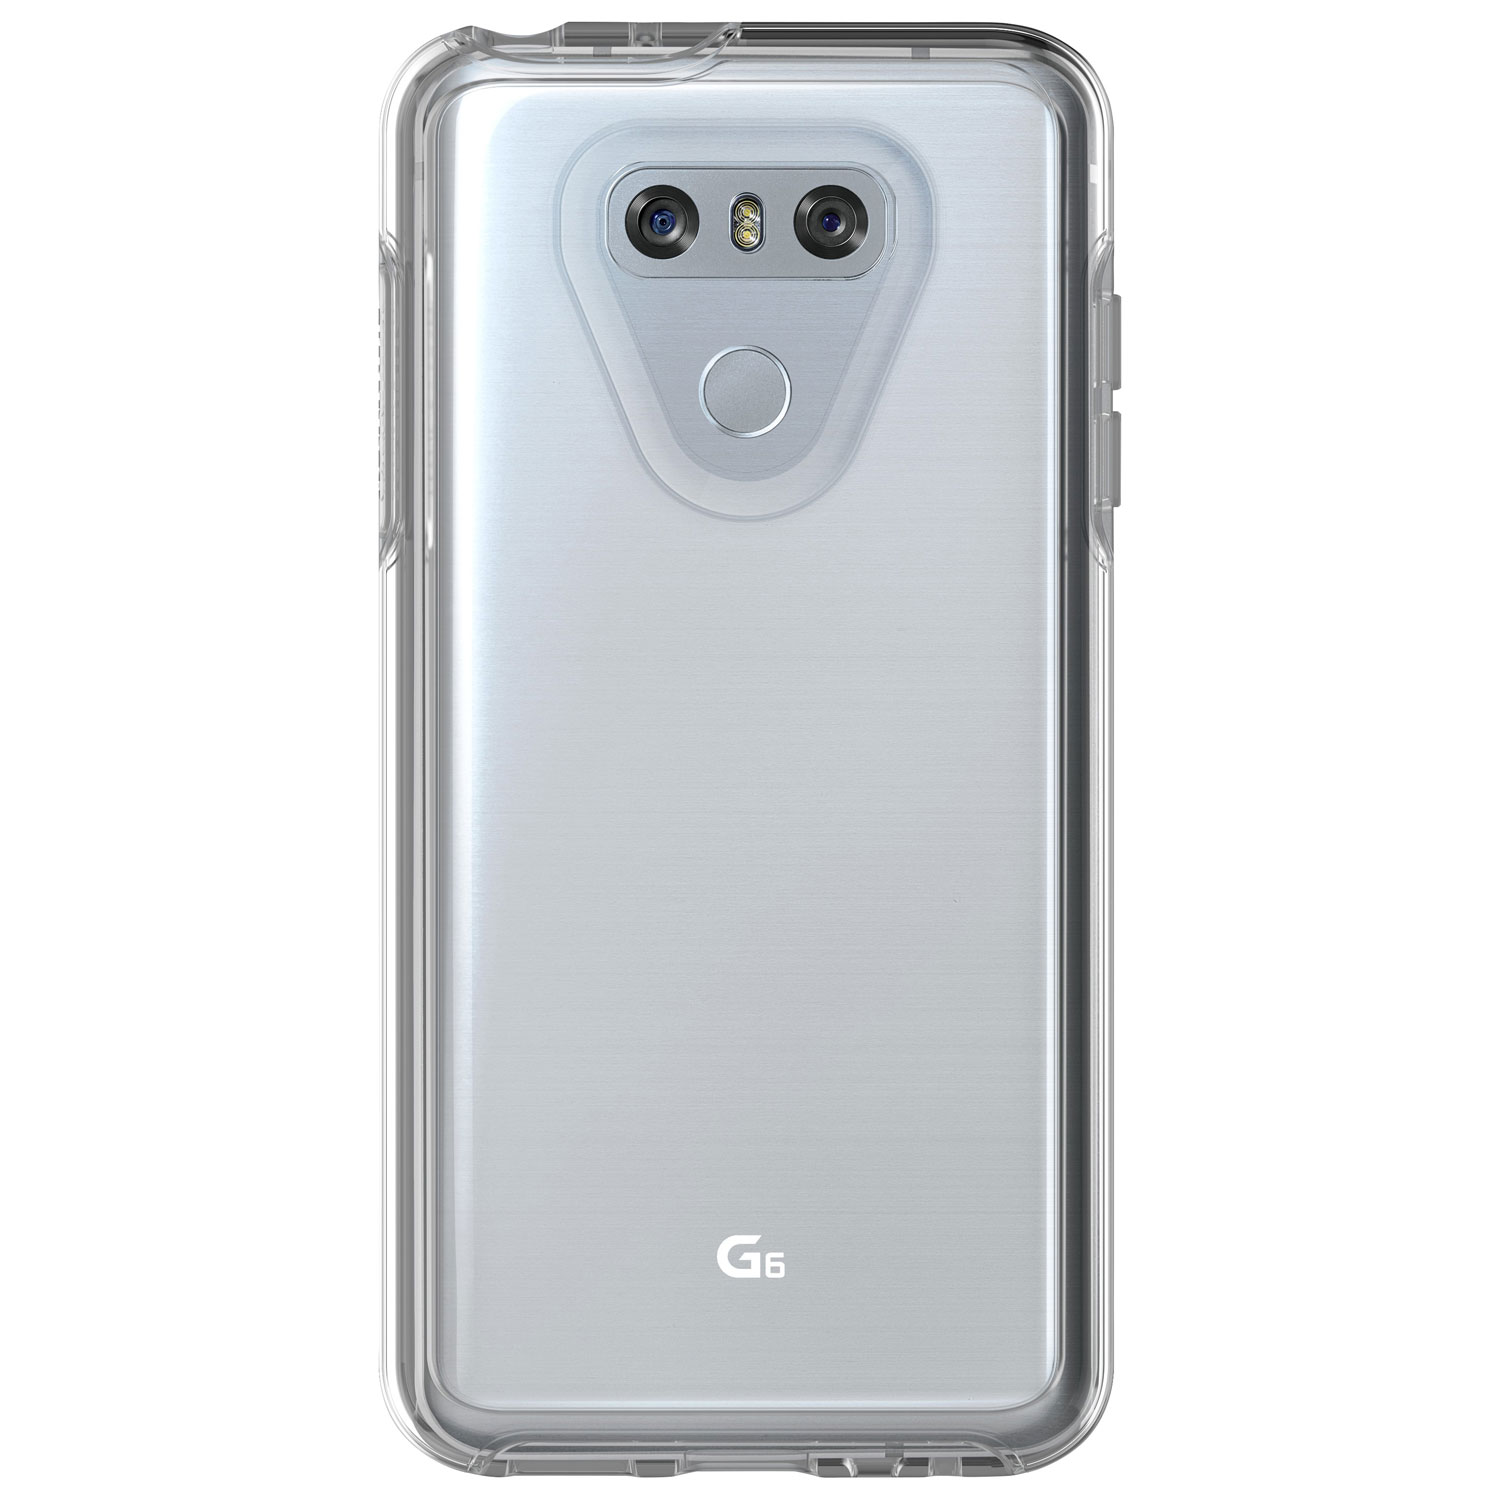 OtterBox MySymmetry Fitted Hard Shell Case for LG G6 - Clear Crystal